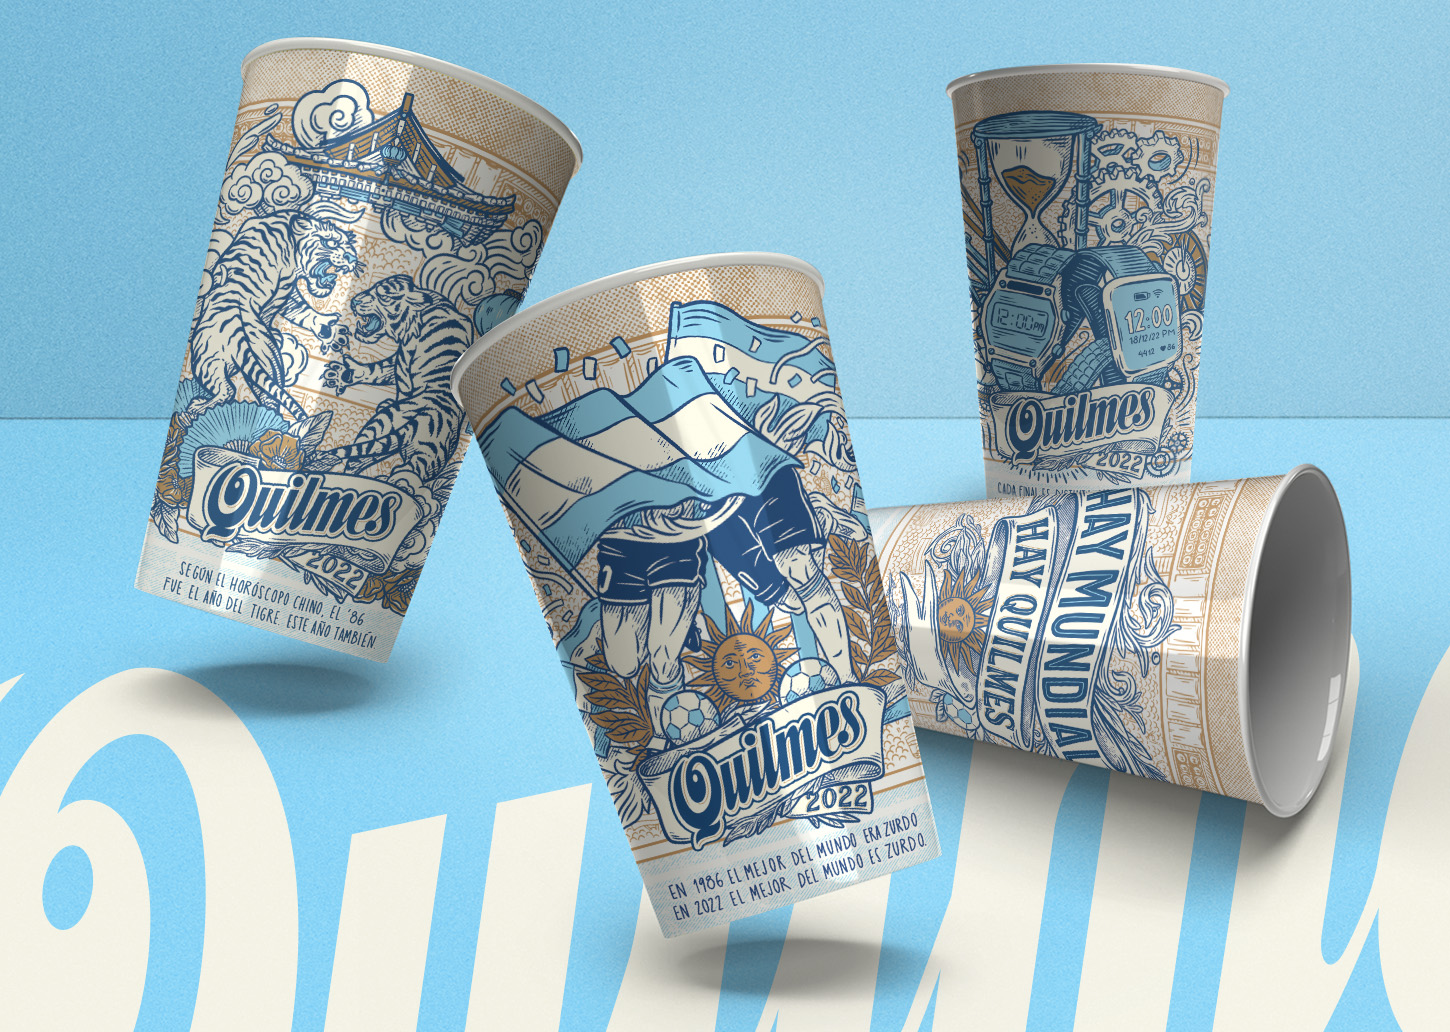 Quilmes Beer World Cup Edition Qatar 2022 by Emi Renzi